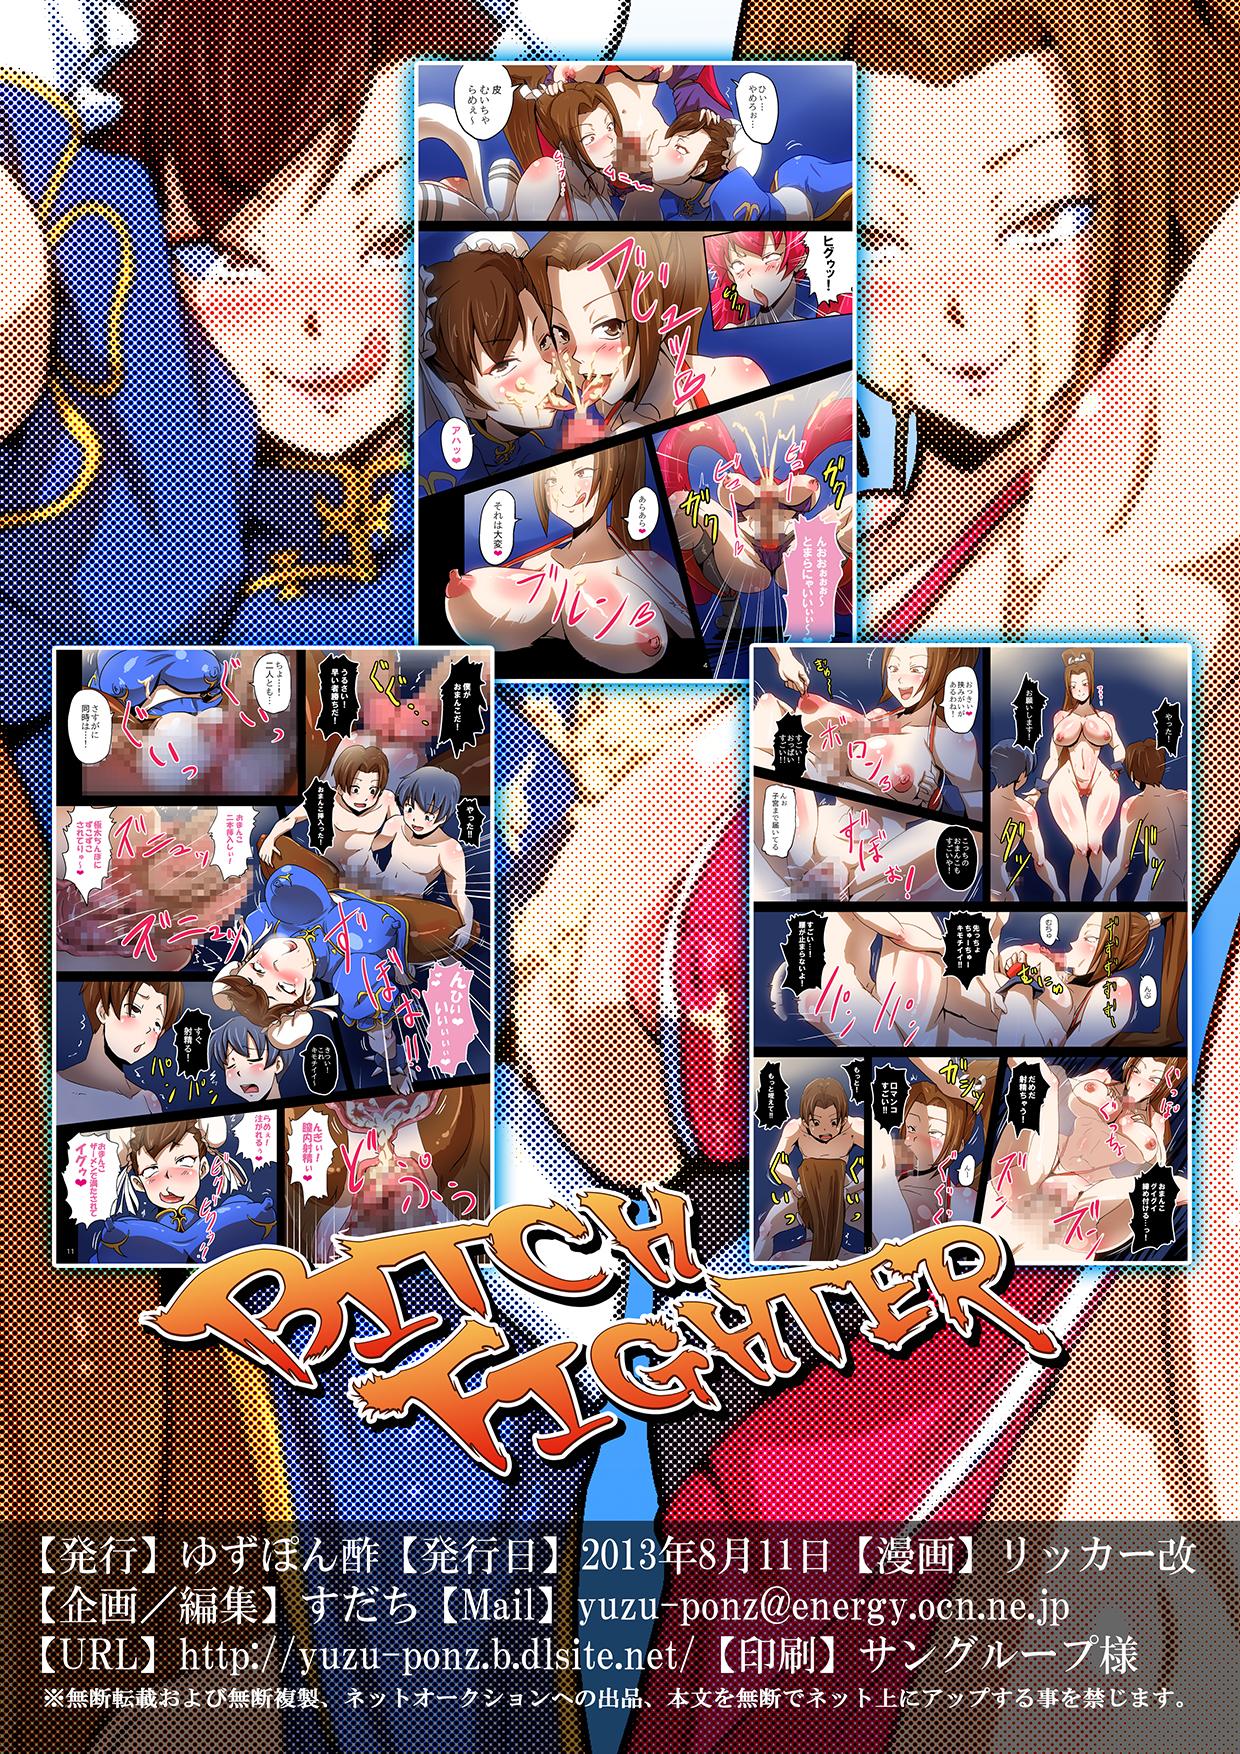 Zorra BITCH FIGHTER - Street fighter King of fighters Doggie Style Porn - Page 16